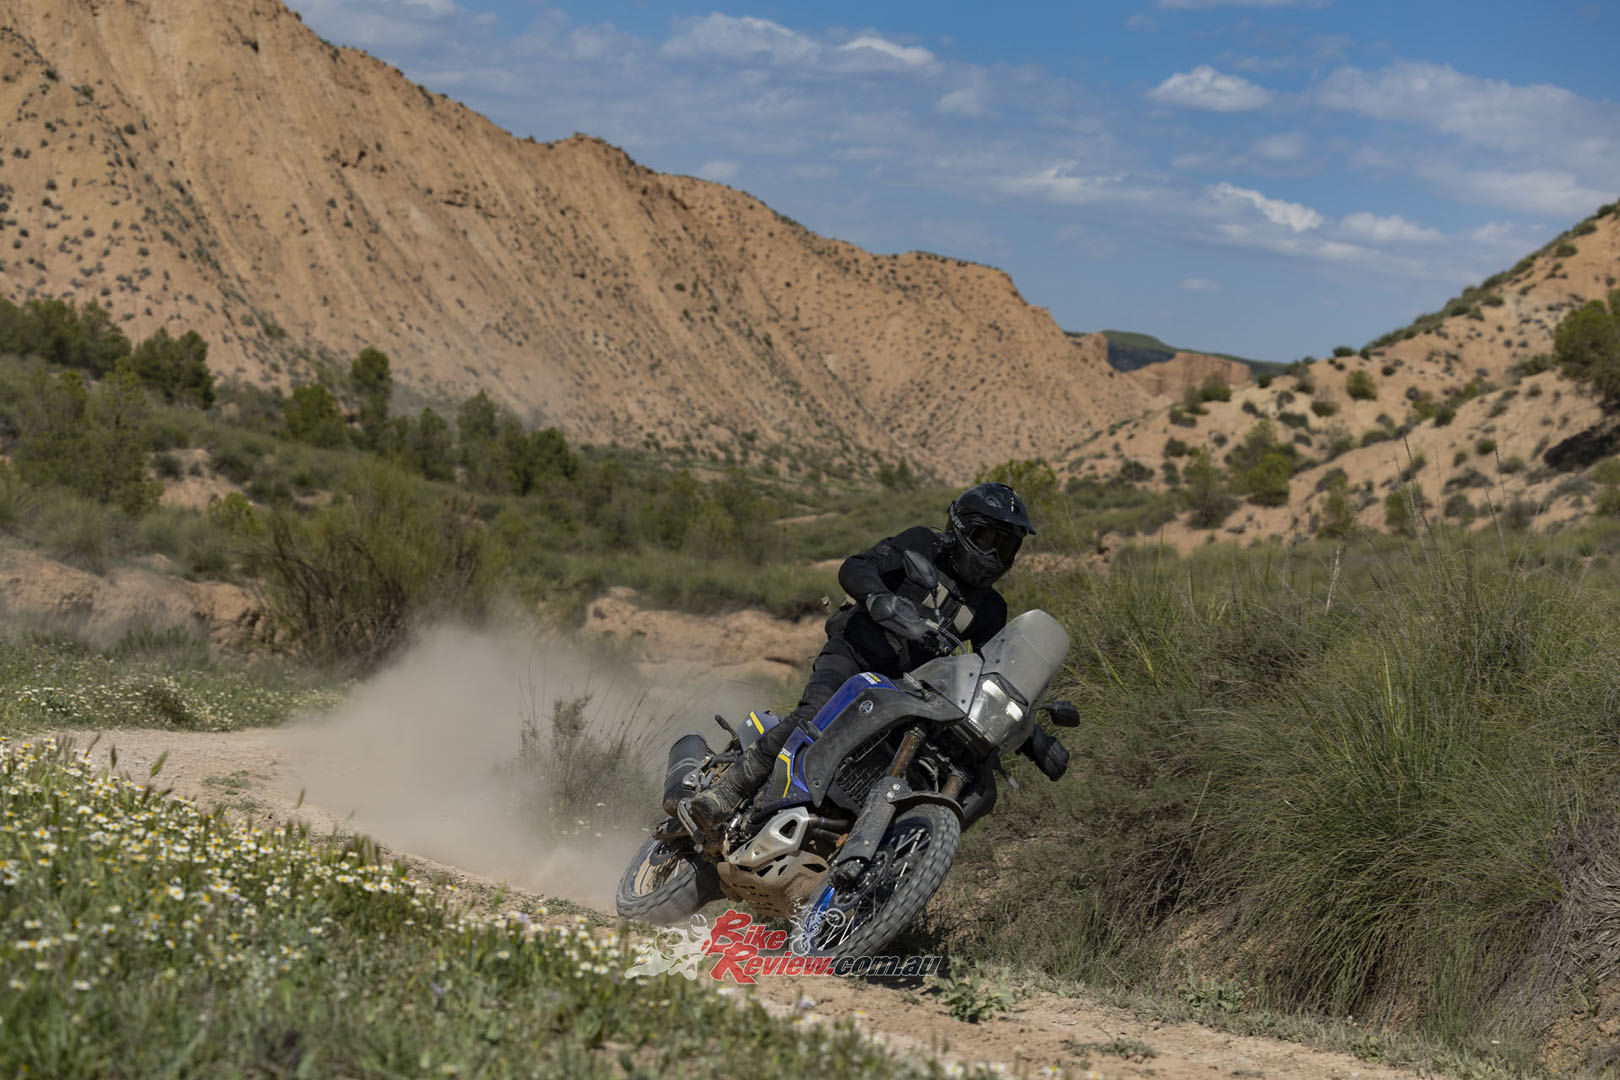 "The standout feature that benefits the new 700 most of all is that upgraded suspension."